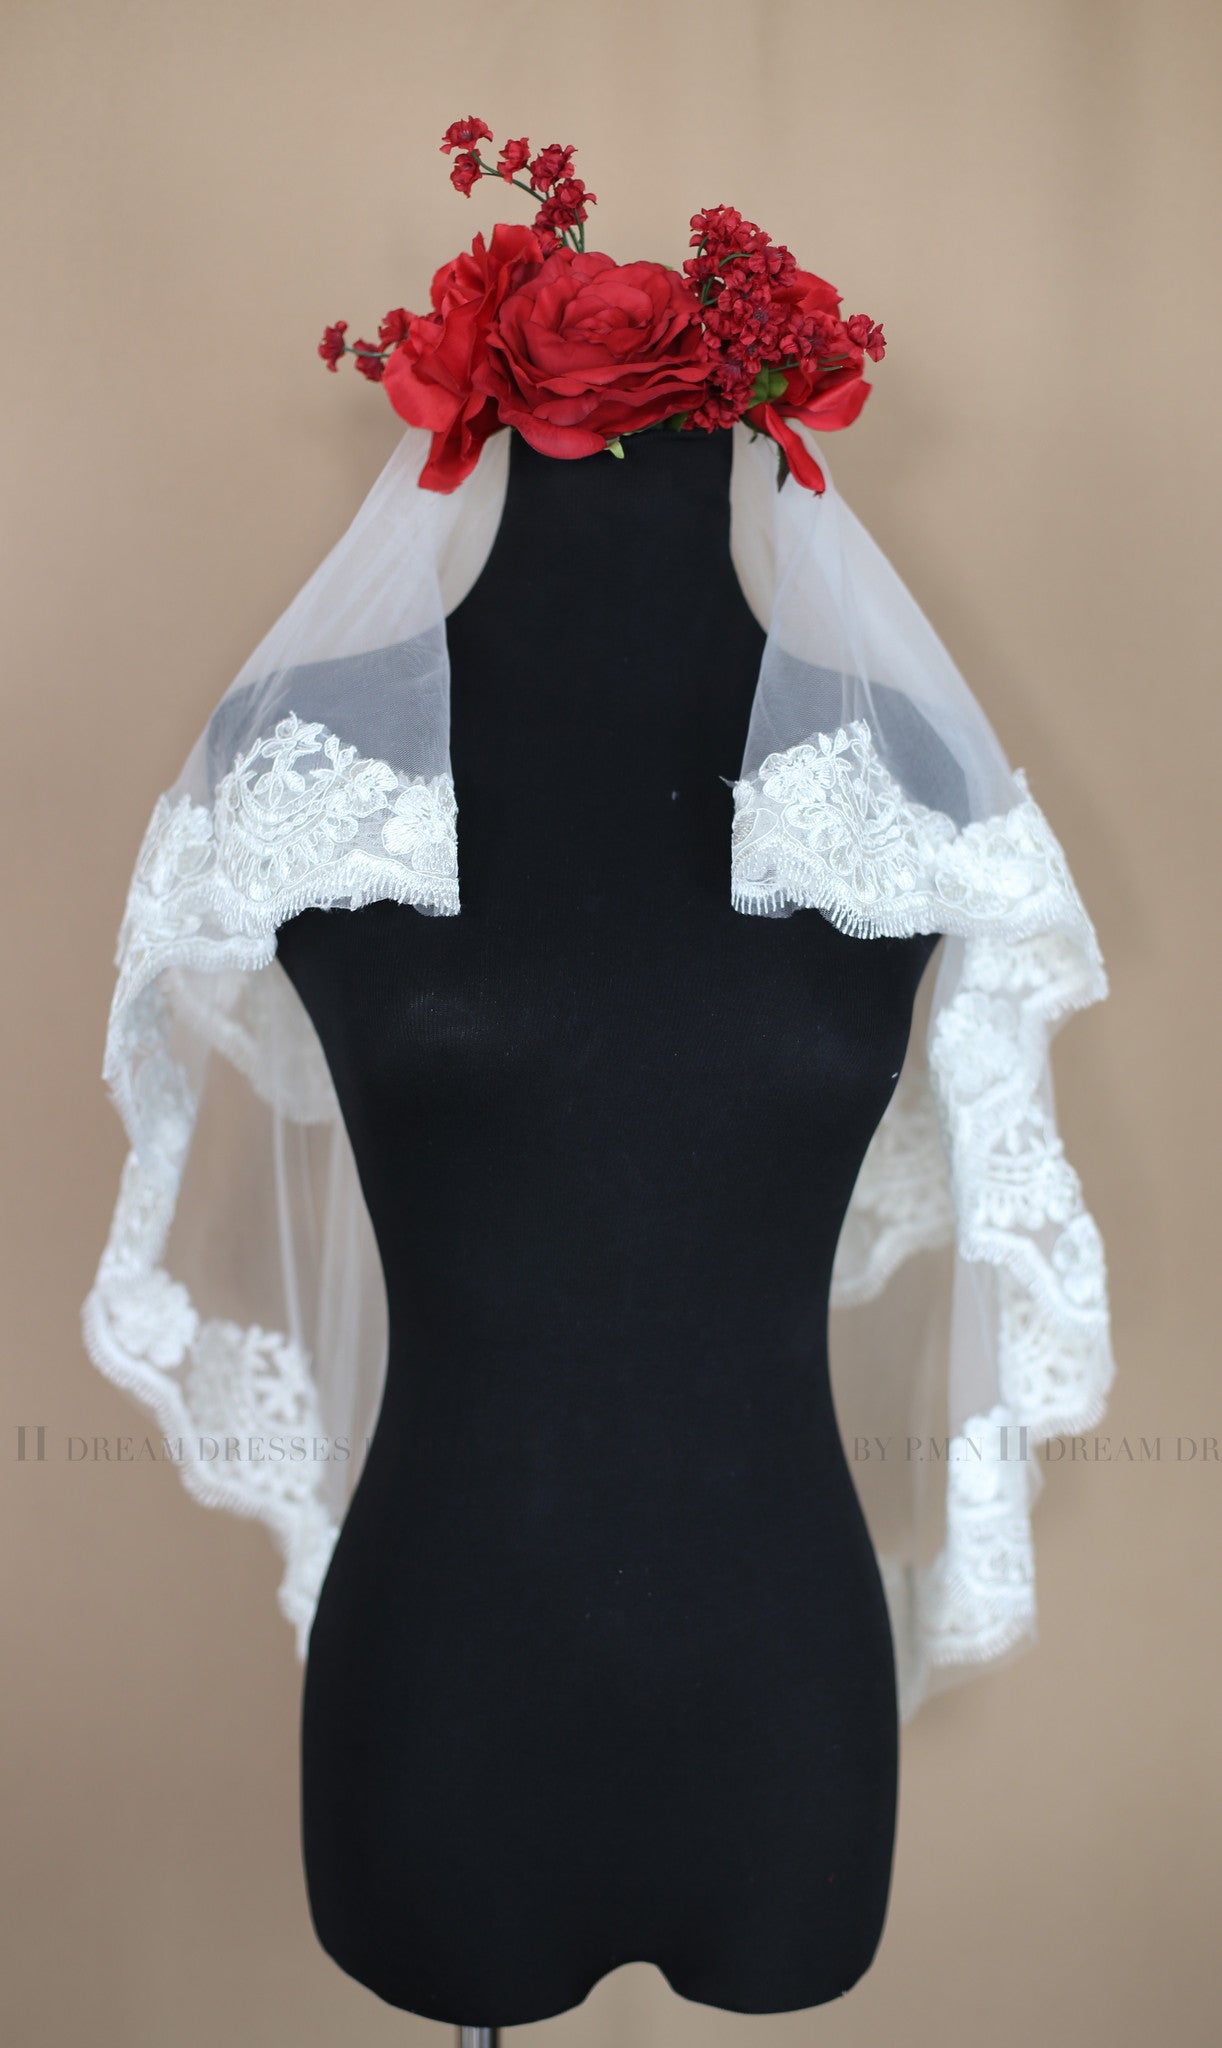 Two Tier Elbow Lace Veil With Blusher (Style # Angie PB159)